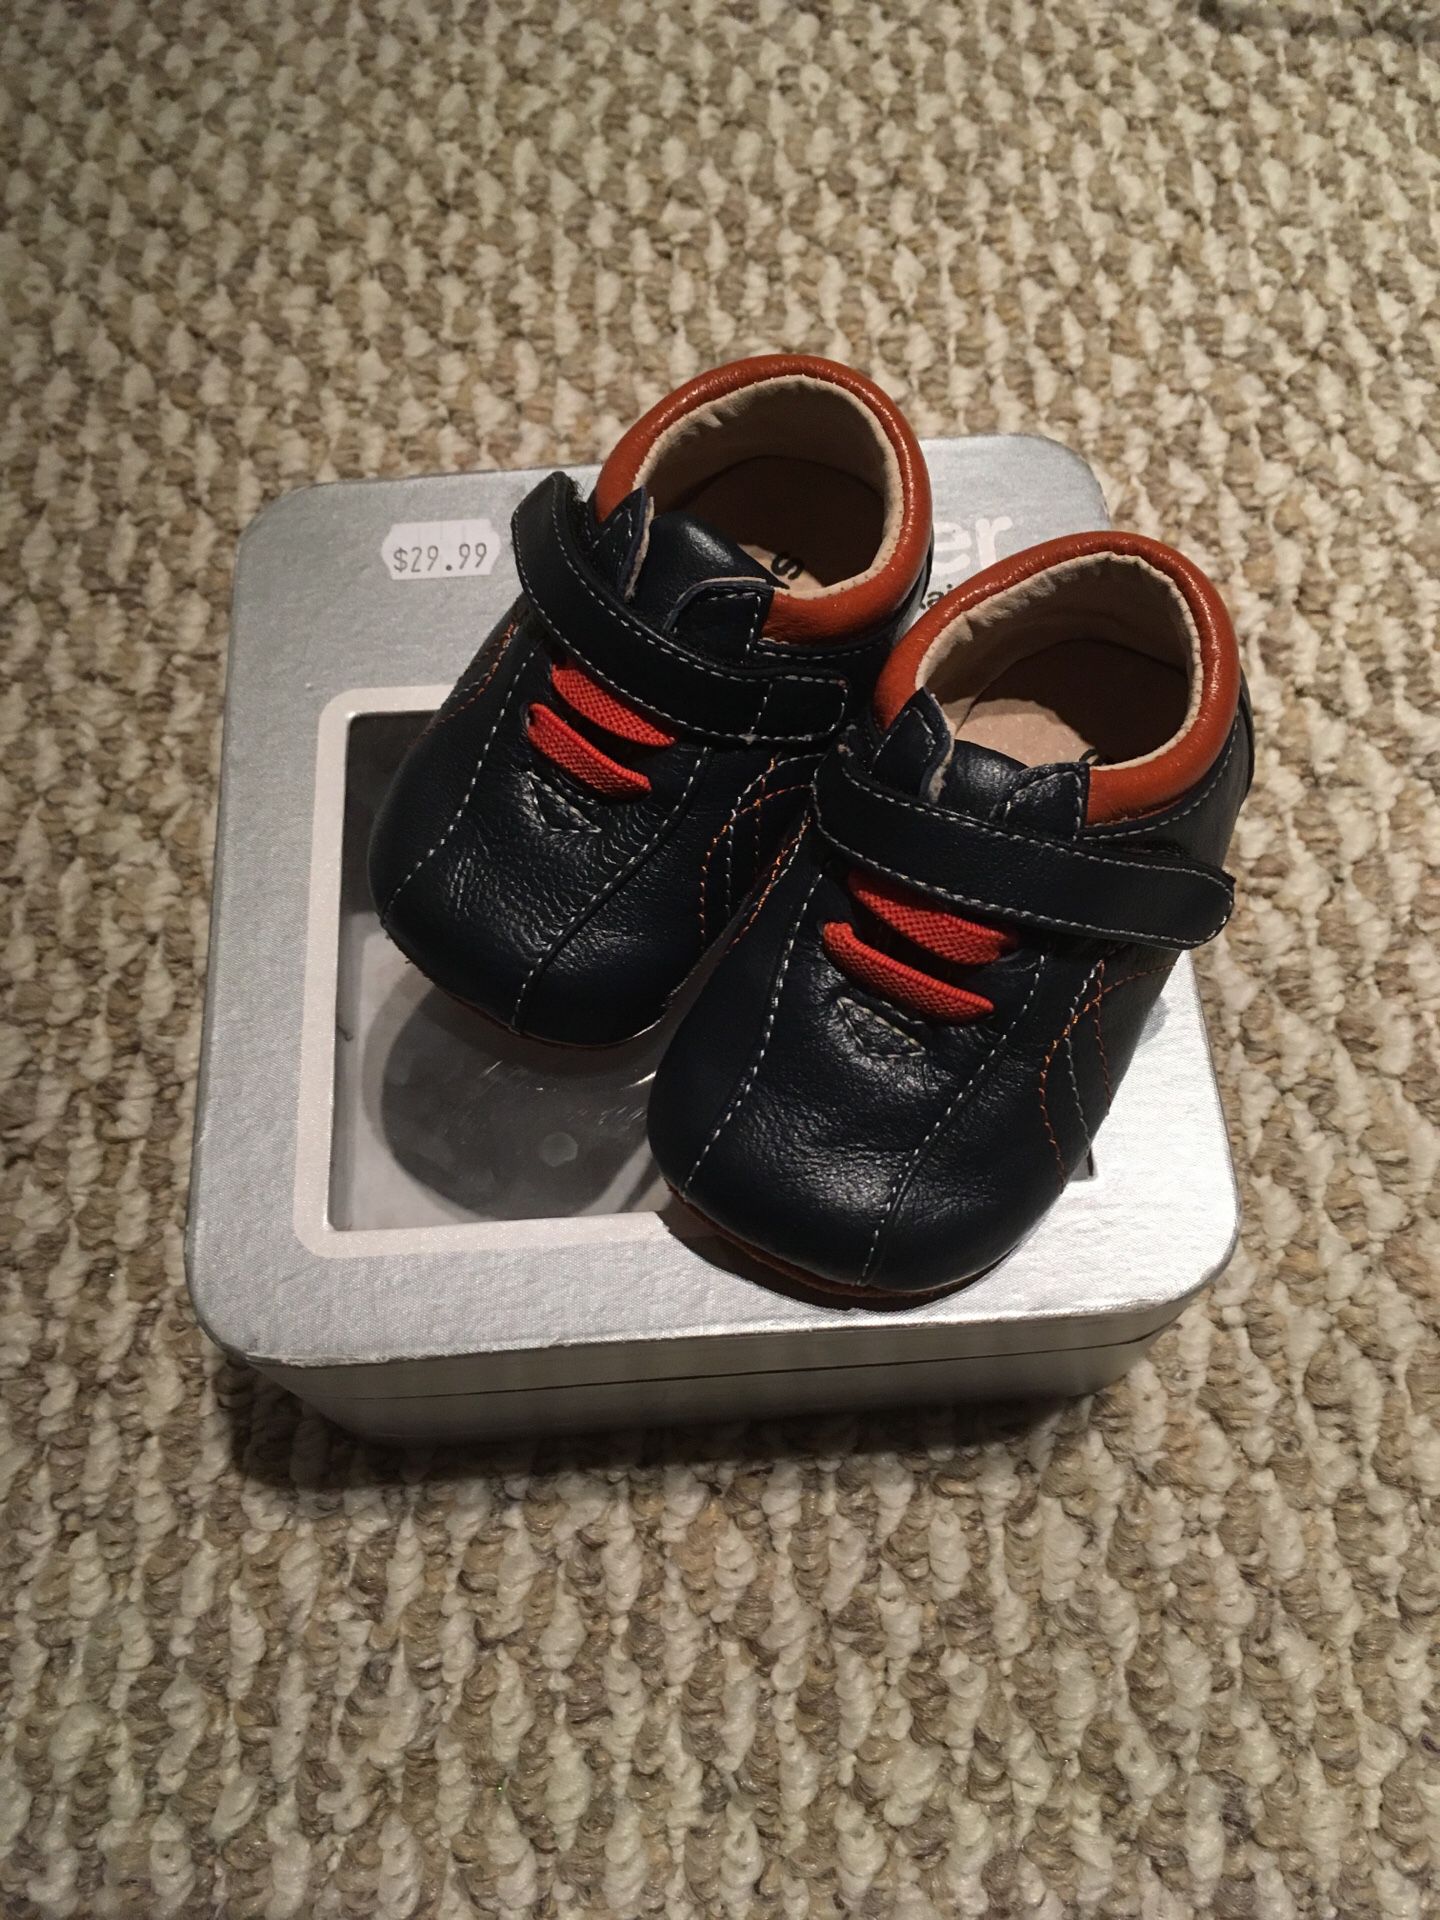 Baby sneaker Slip Ons 0-6 month -never used